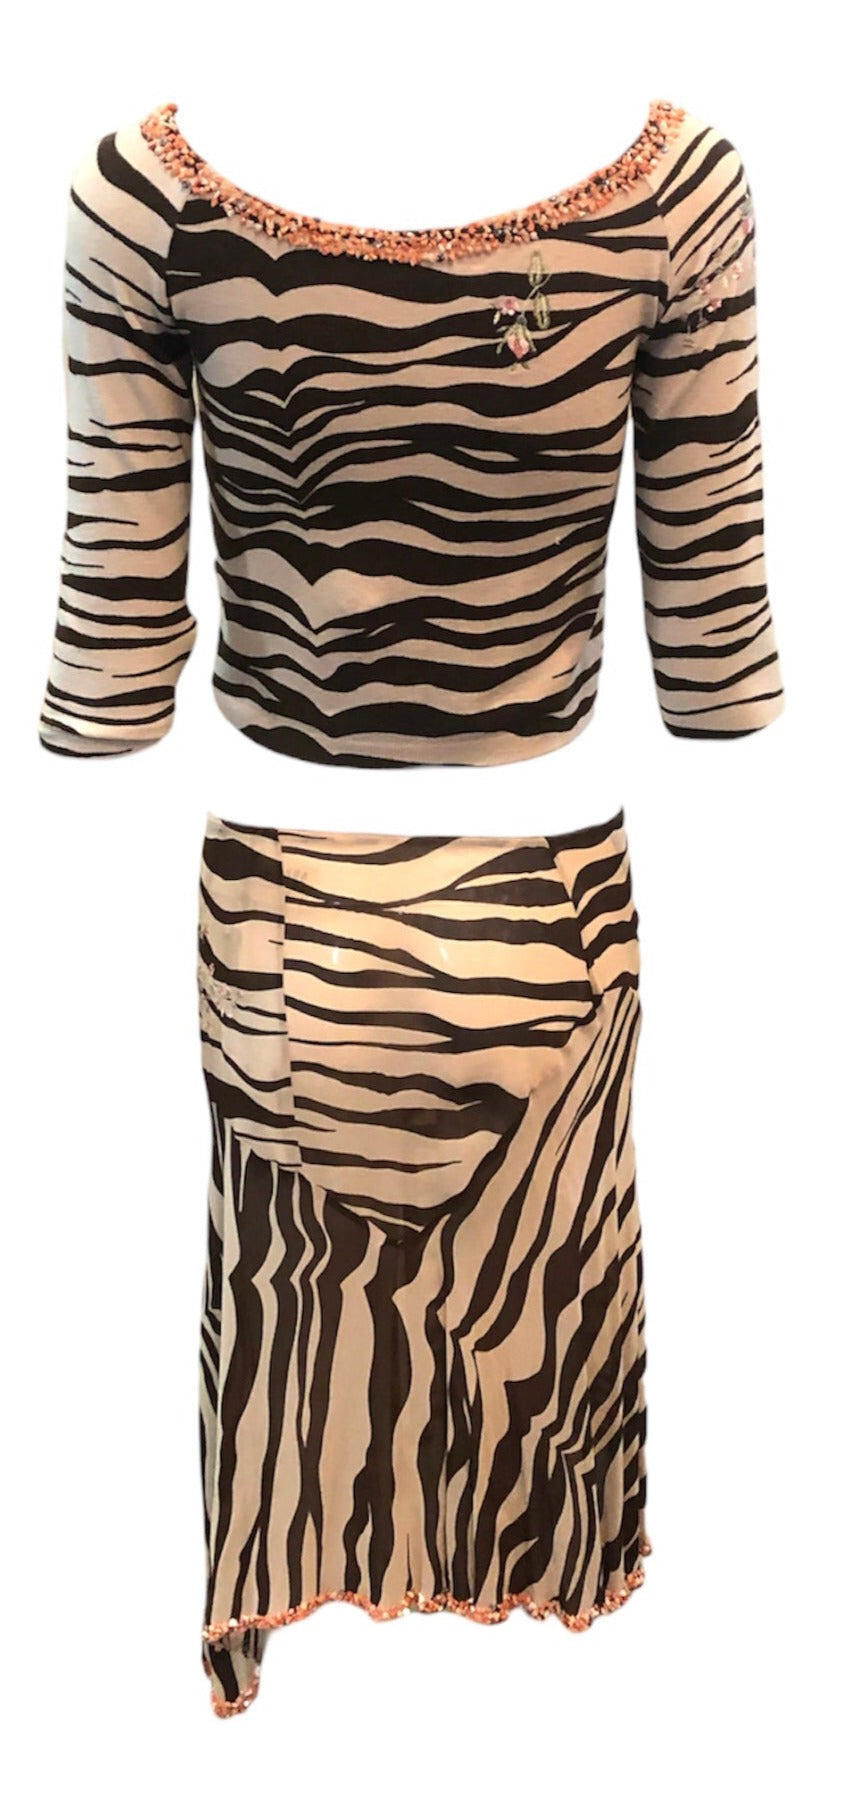  Blumarine Y2k Tiger Print Skirt and Cashmere Sweater Ensemble BACK 3 of 5